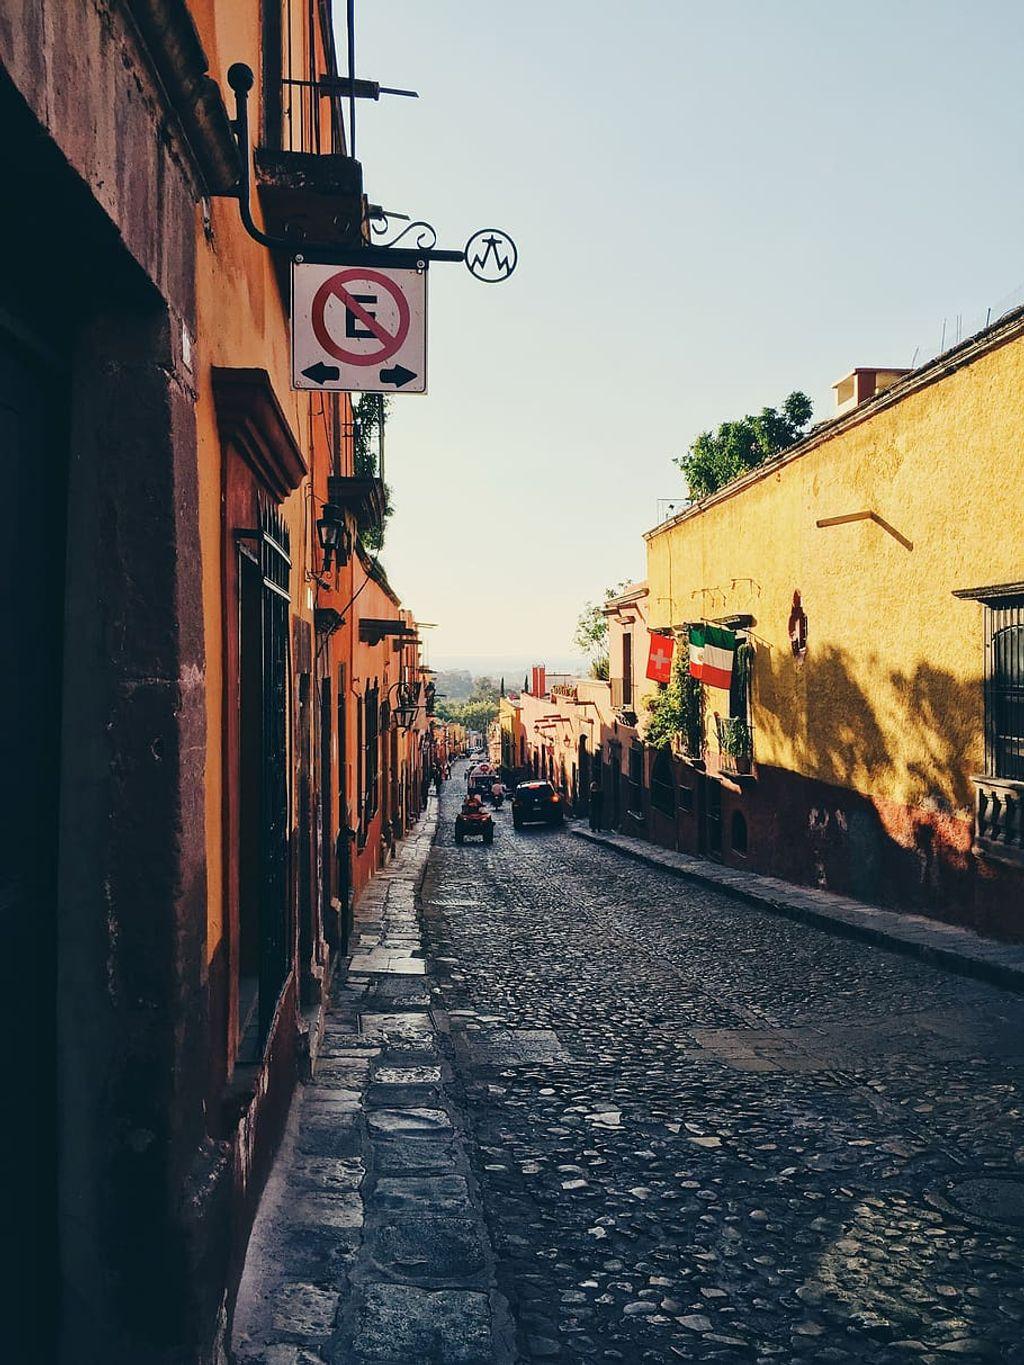 The Ultimate Guide: How to Get From Mexico City Airport to San Miguel de Allende